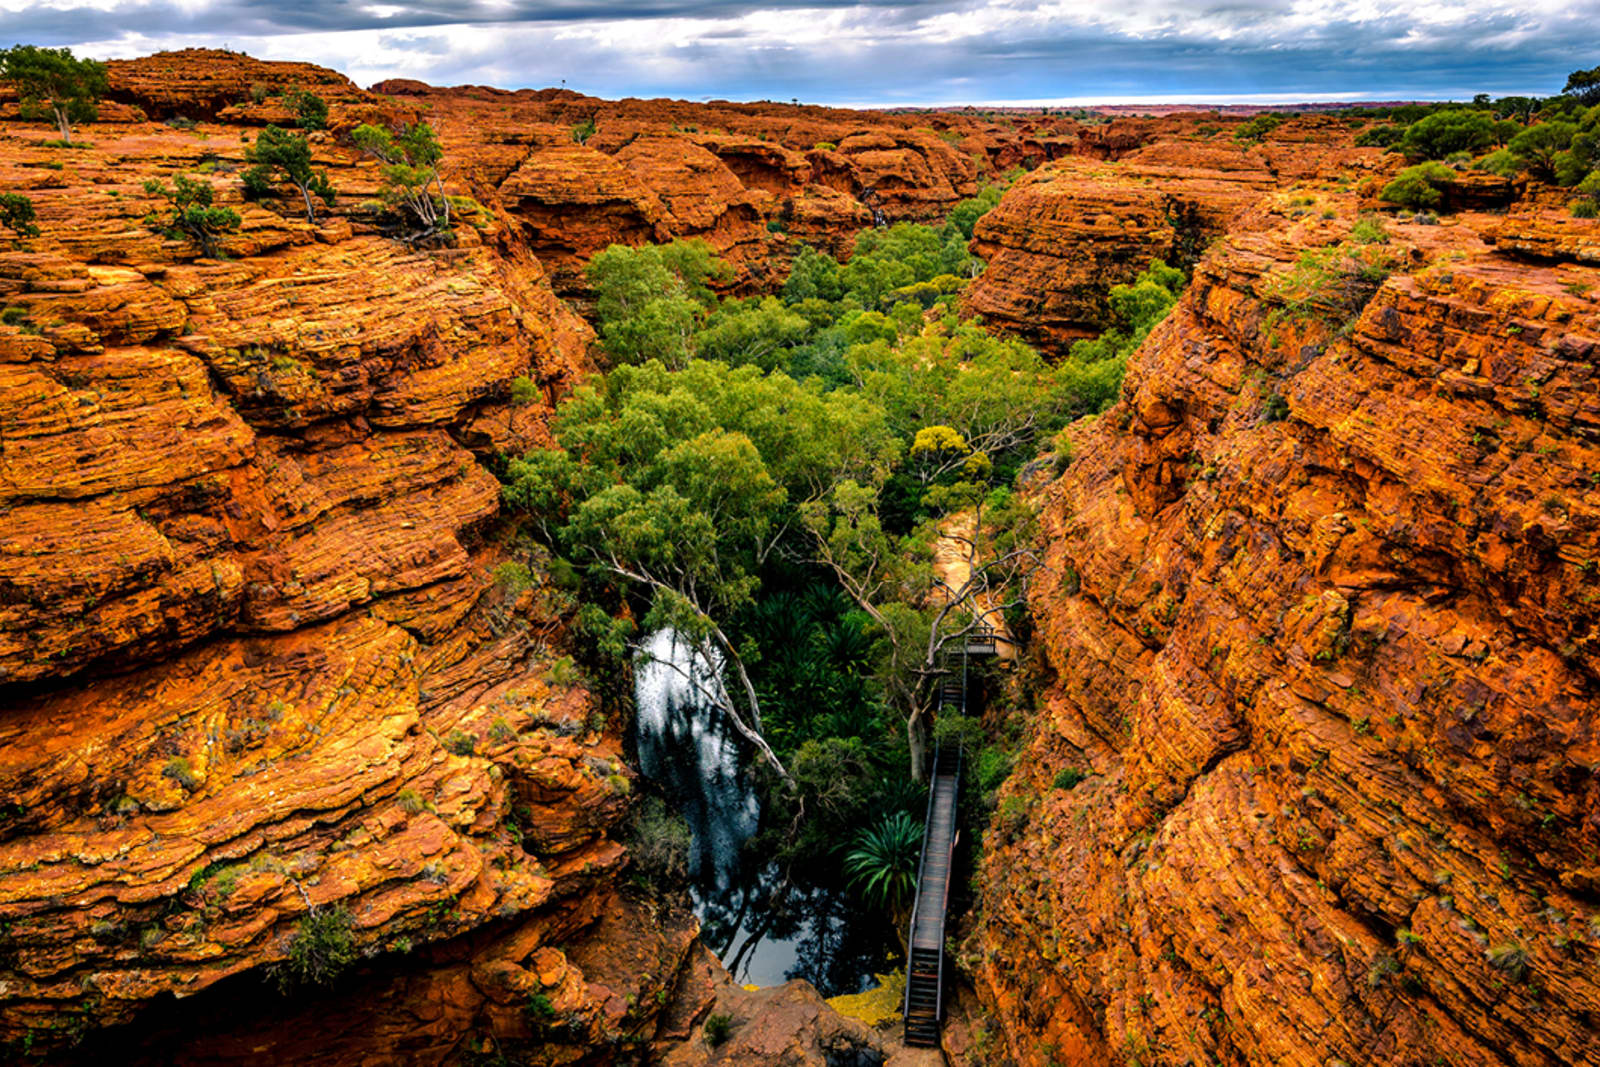 The 300-metre-high sandstone walls at Kings Canyon will take your breath away